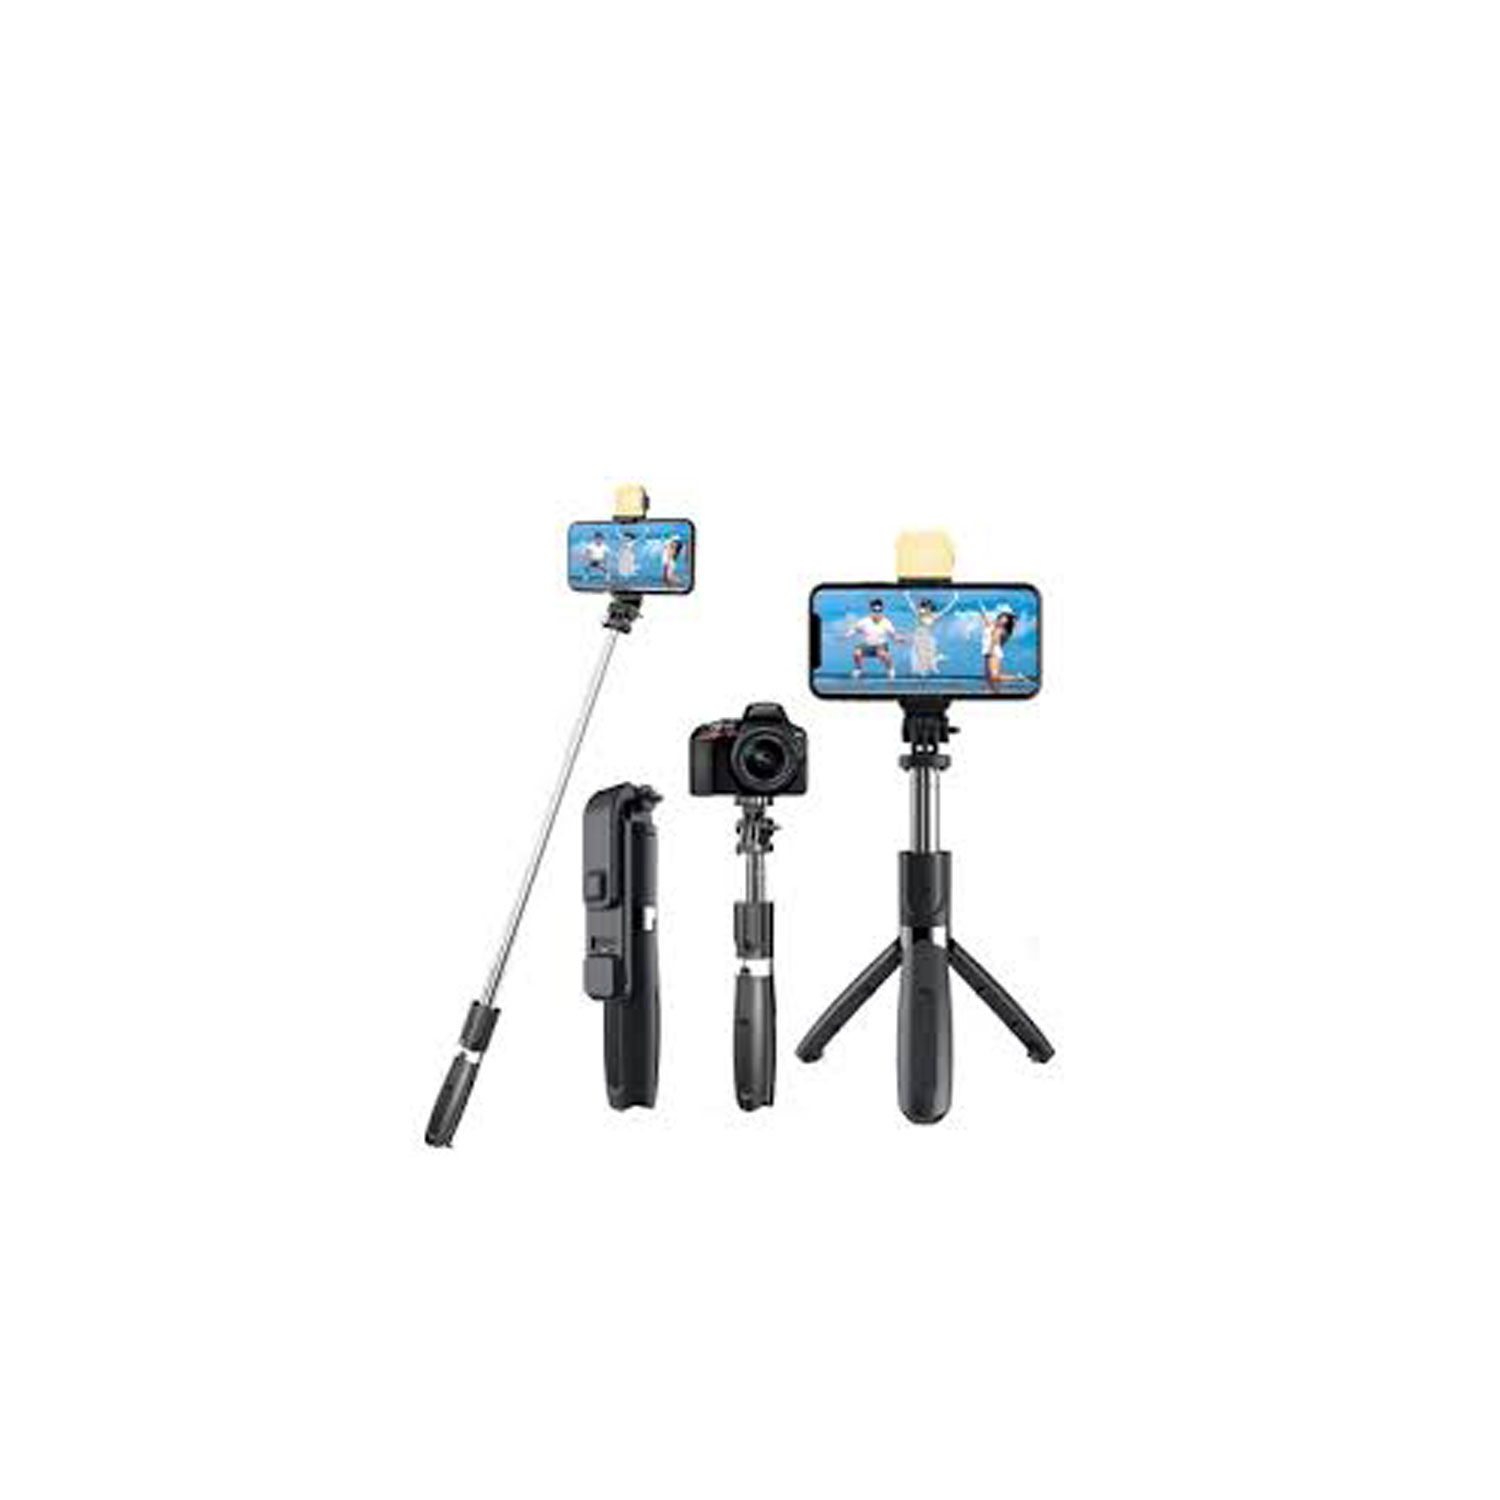 Selfie Stick with Led Light Wireless Remote and Tripod Stand 104cm for All iPhone and Android Smartphone